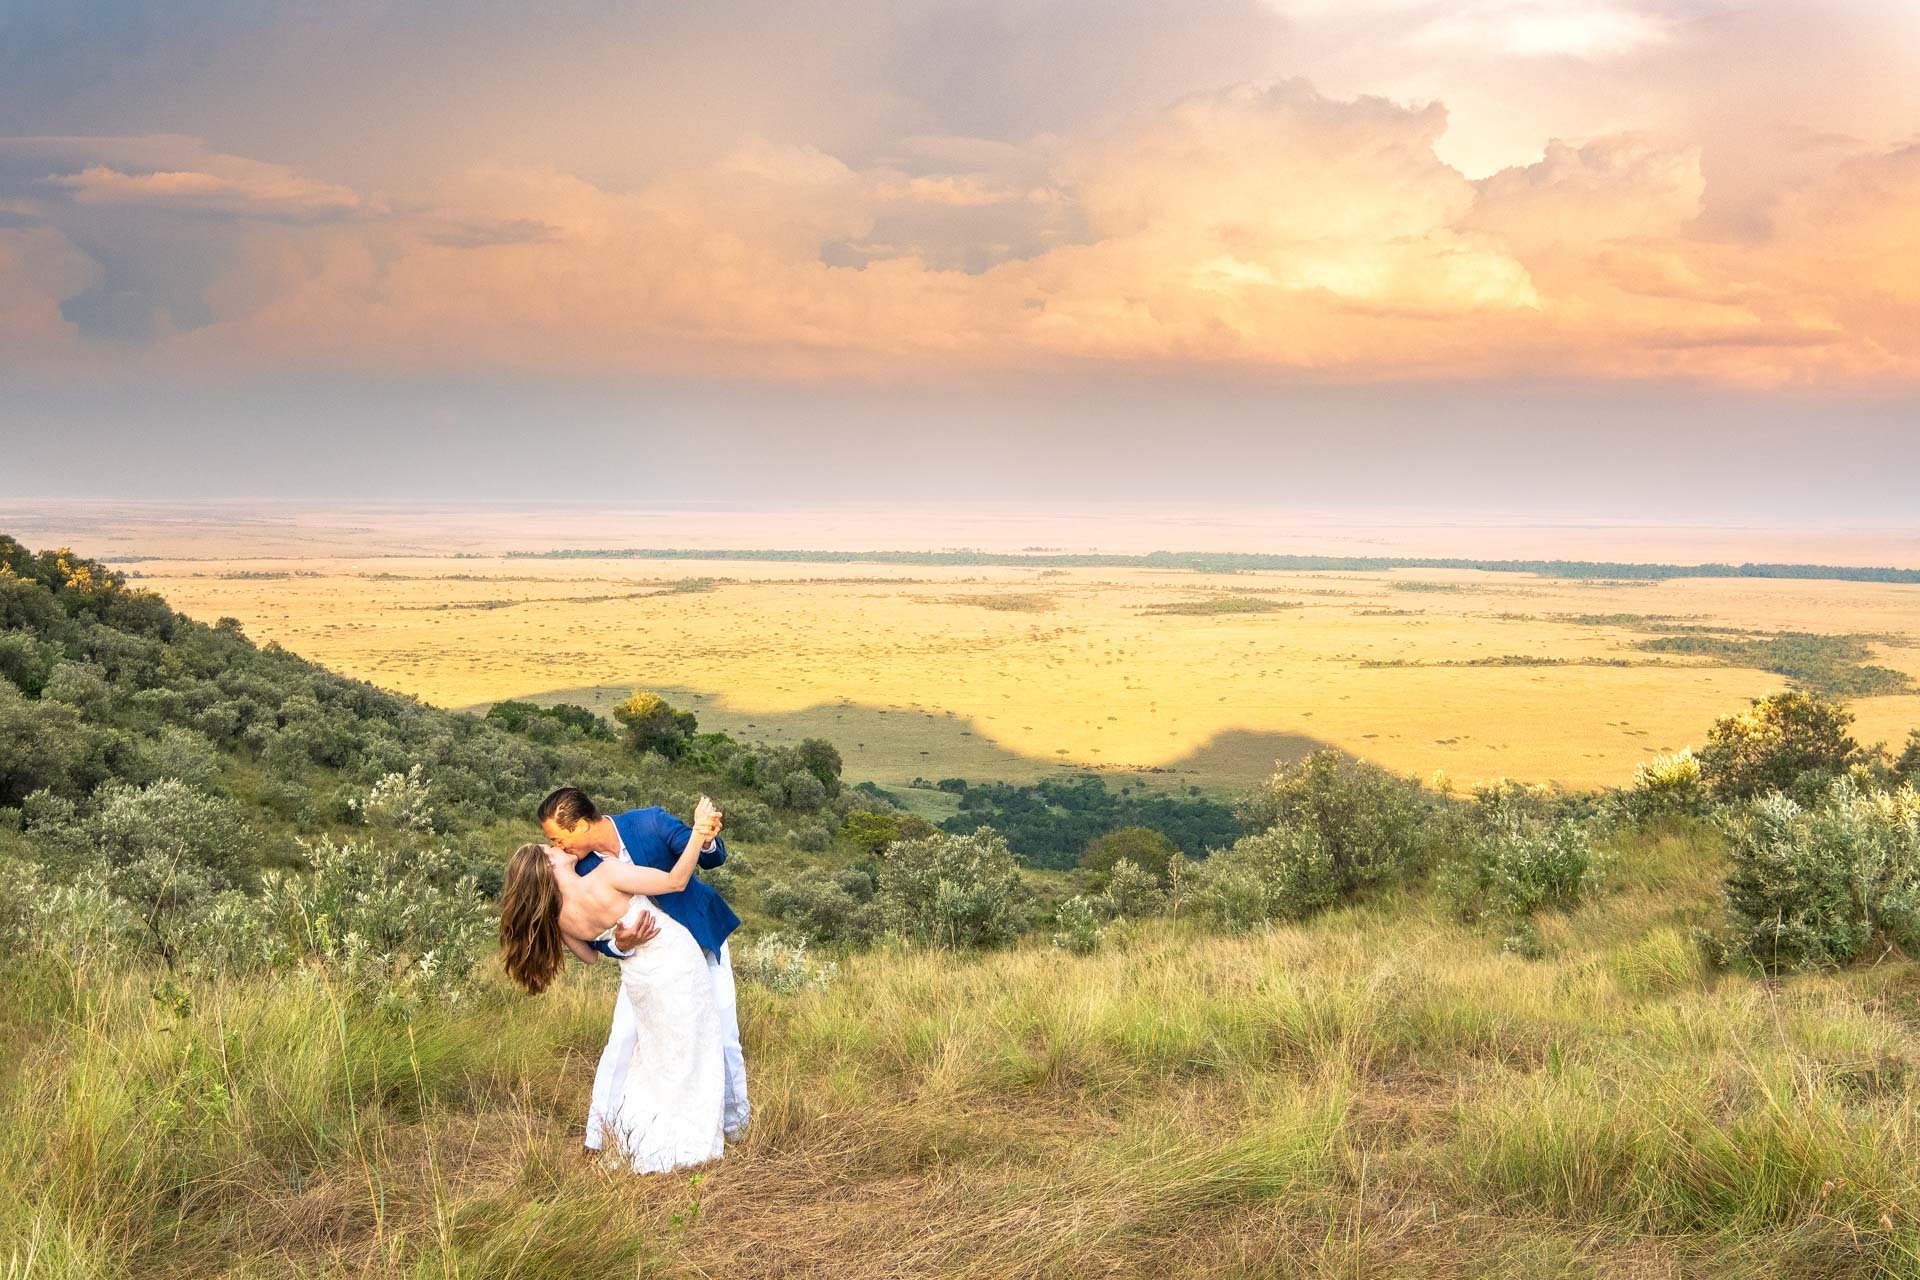 The author and his wife, Mary, during their wedding at Angama Mara